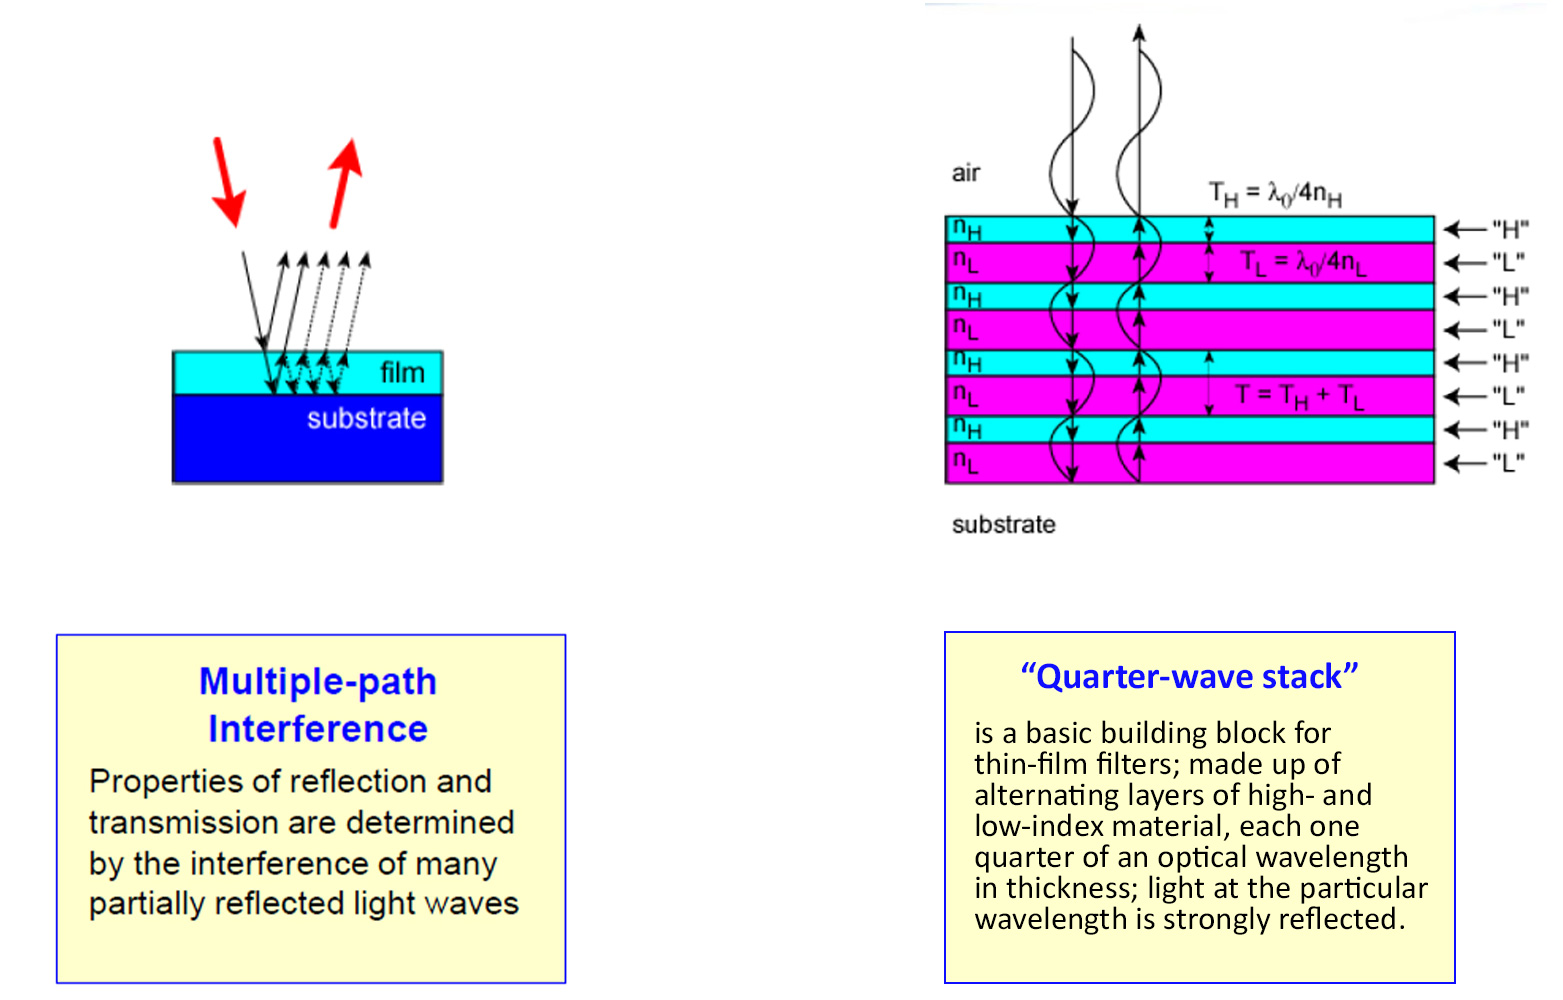 multiple-path interference and quarter-wave stack diagrams